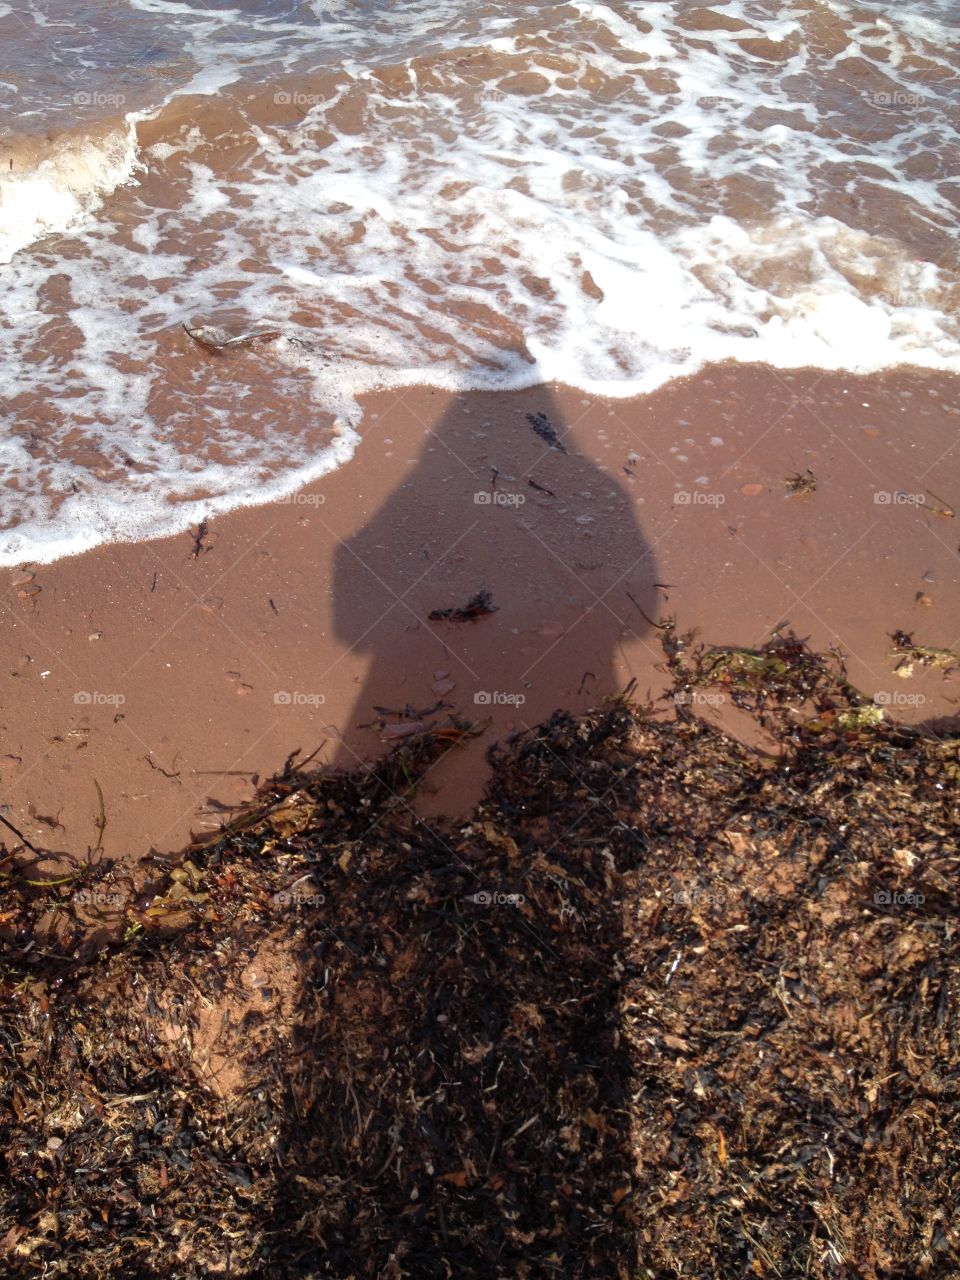 Standing on the beach in the morning with my shadow